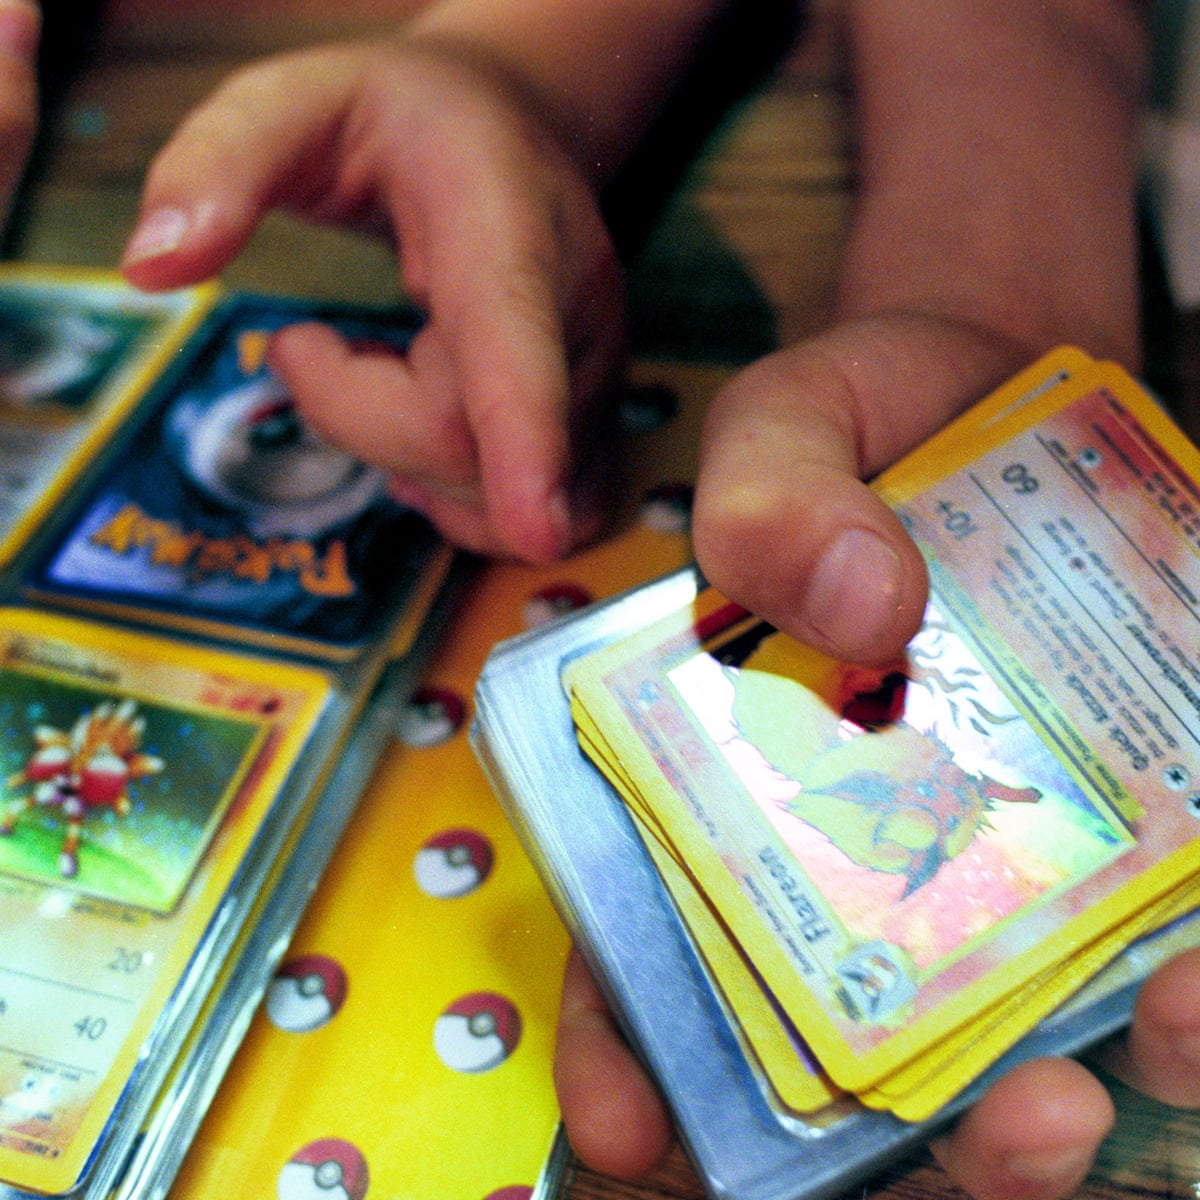 Us Target Stores To Stop Selling Pokemon Cards After Rising Value Prompts Threats To Staff Pokemon The Guardian